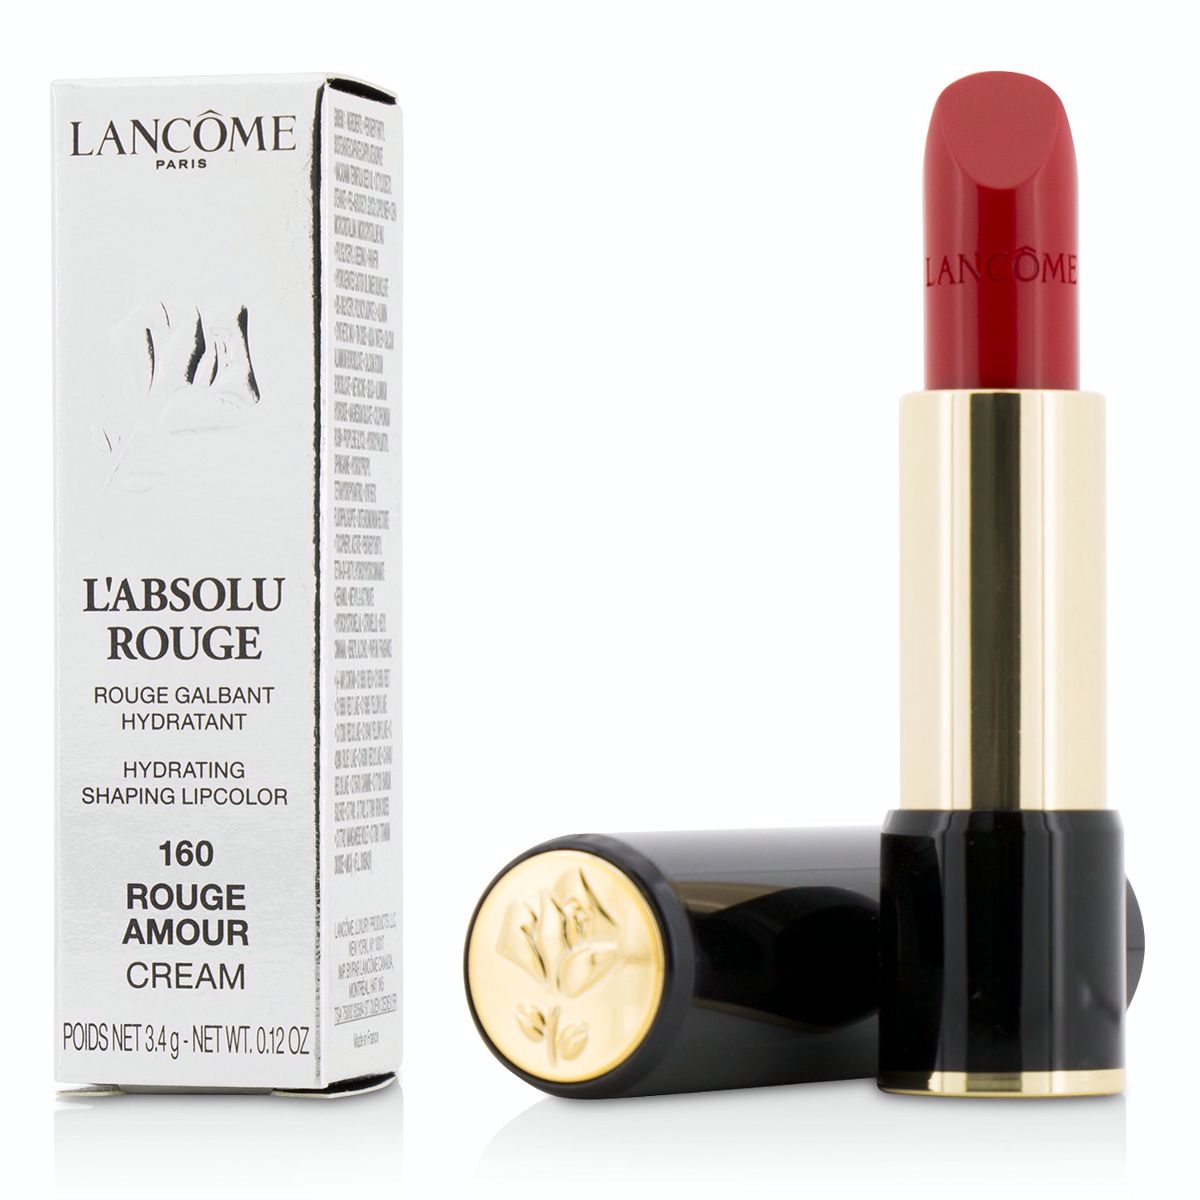 L Absolu Rouge Hydrating Shaping Lipcolor - # 160 Rouge Amour (Cream) Lancome Image